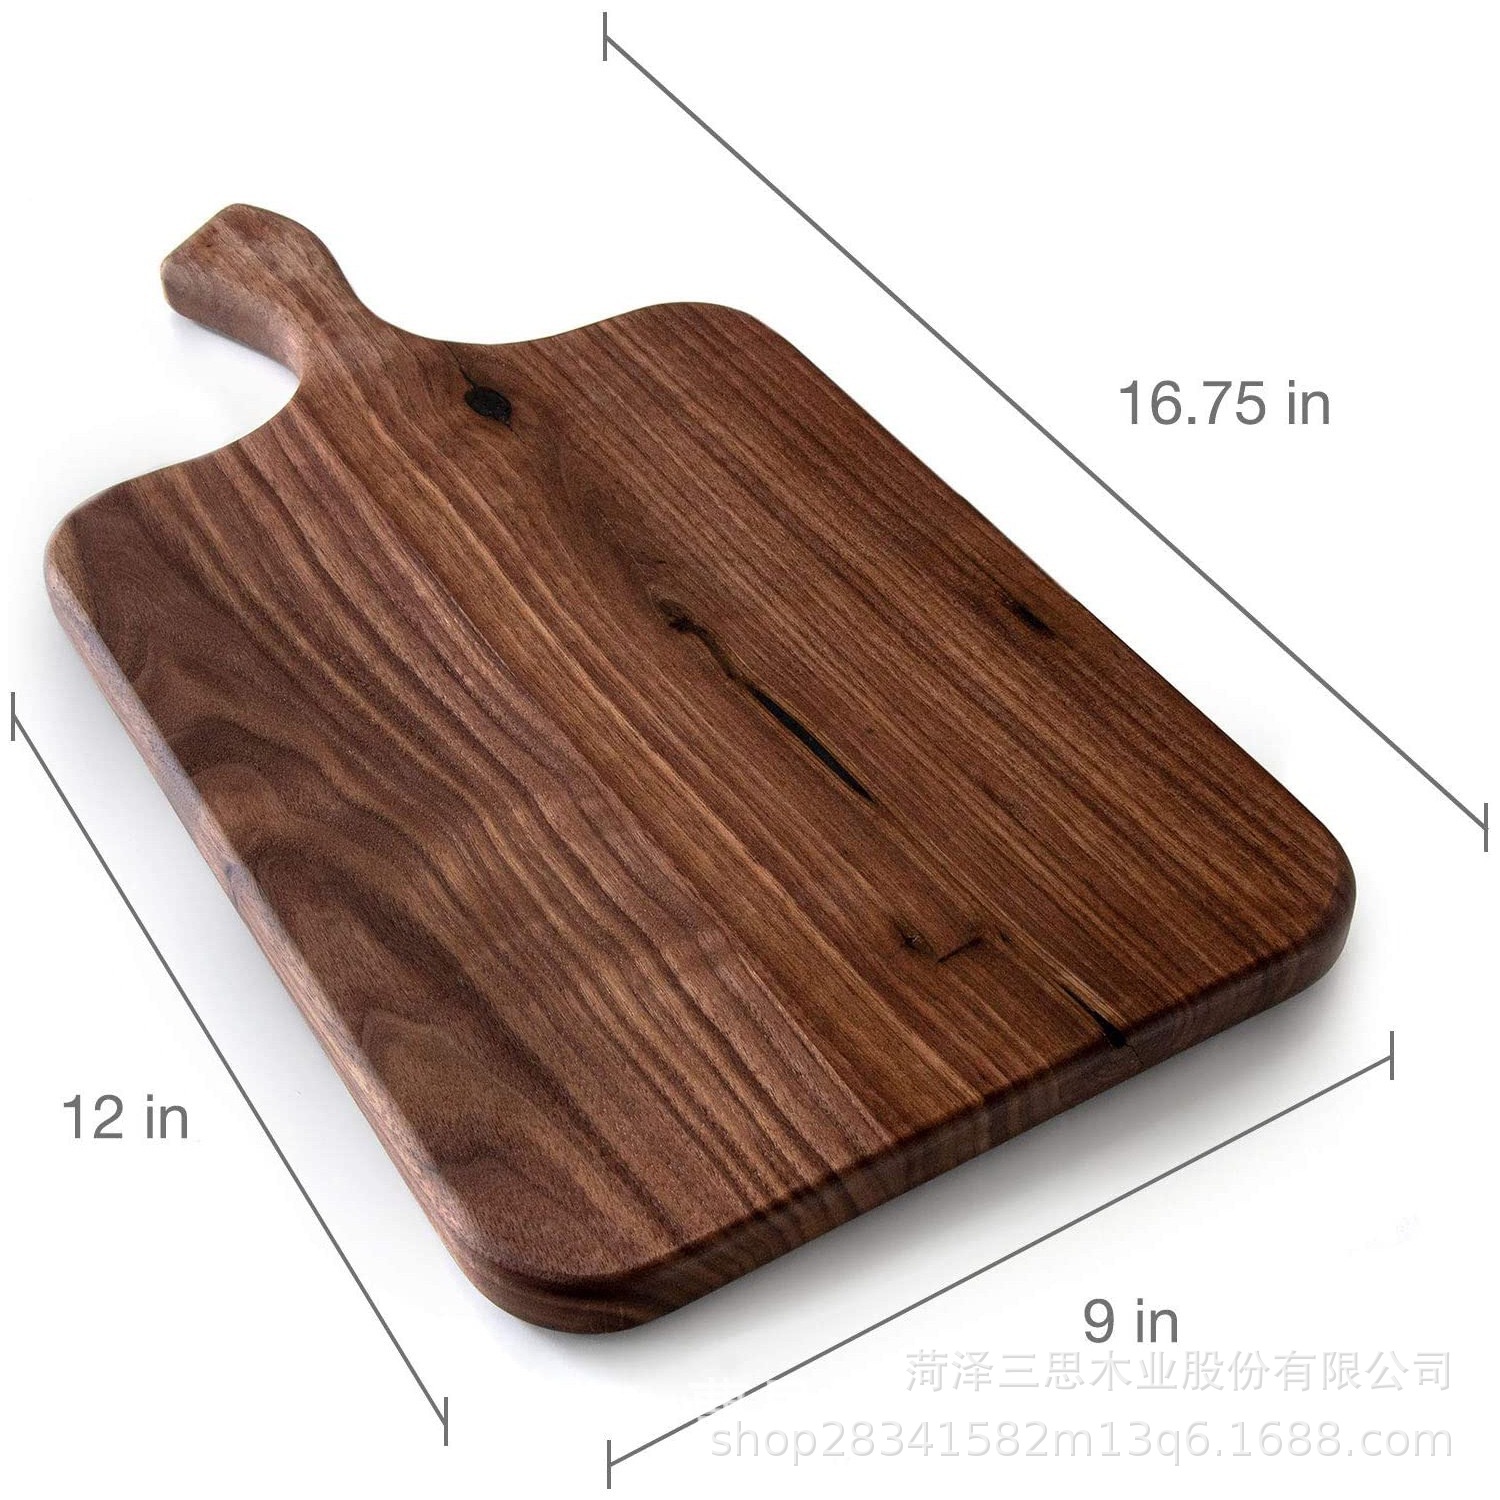 Customized Solid Wood Cutting Board Household Cutting Board Kitchen Panel Fruit Rolling Cutting Board Wooden Cutting Board Acacia Mangium Cutting Board